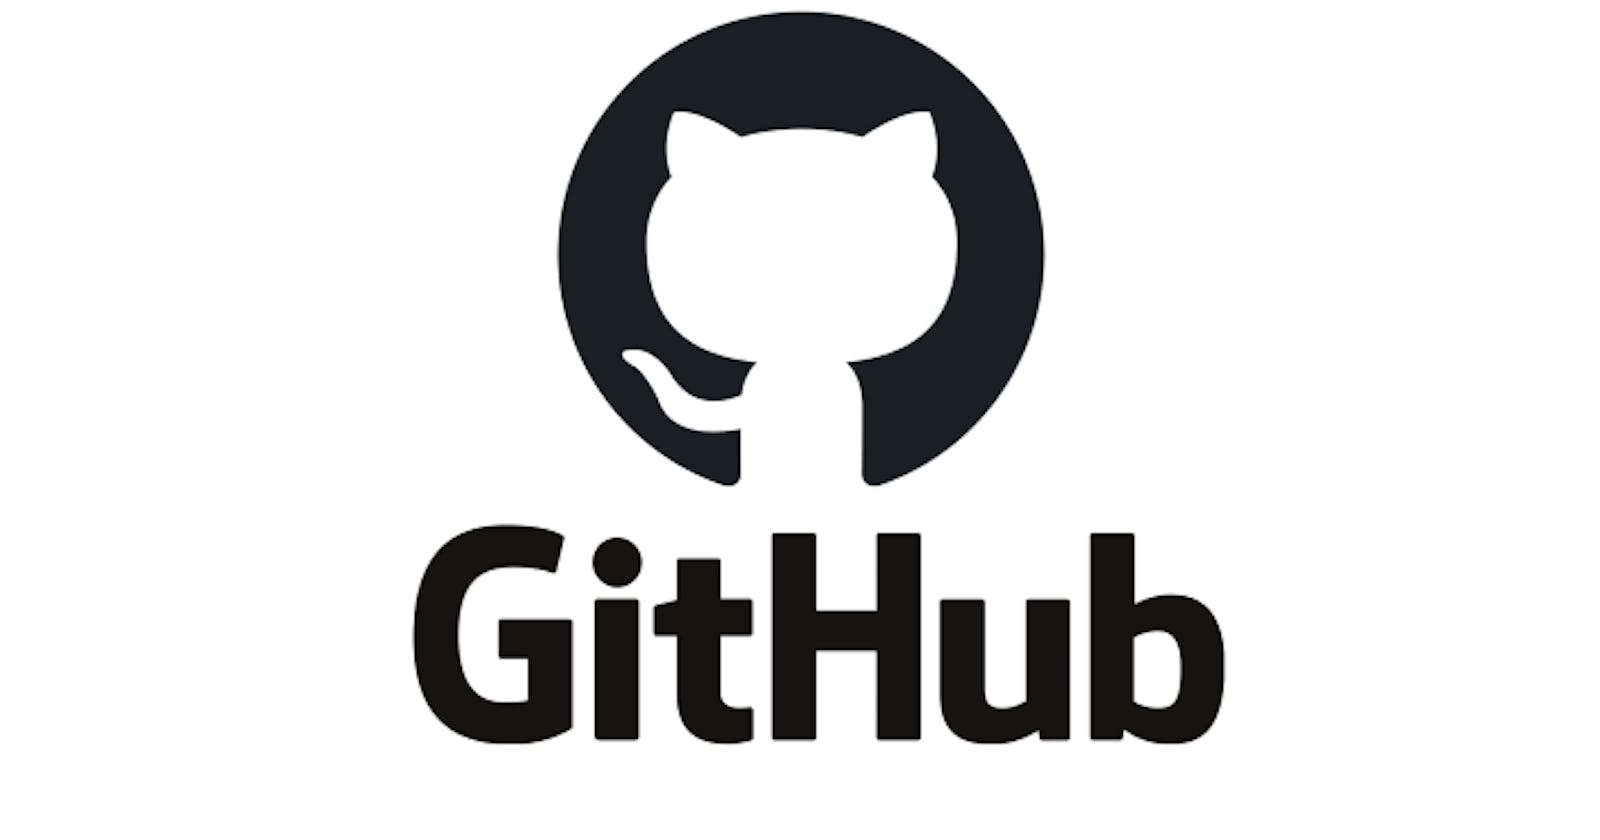 Use Github repositories to learn new things